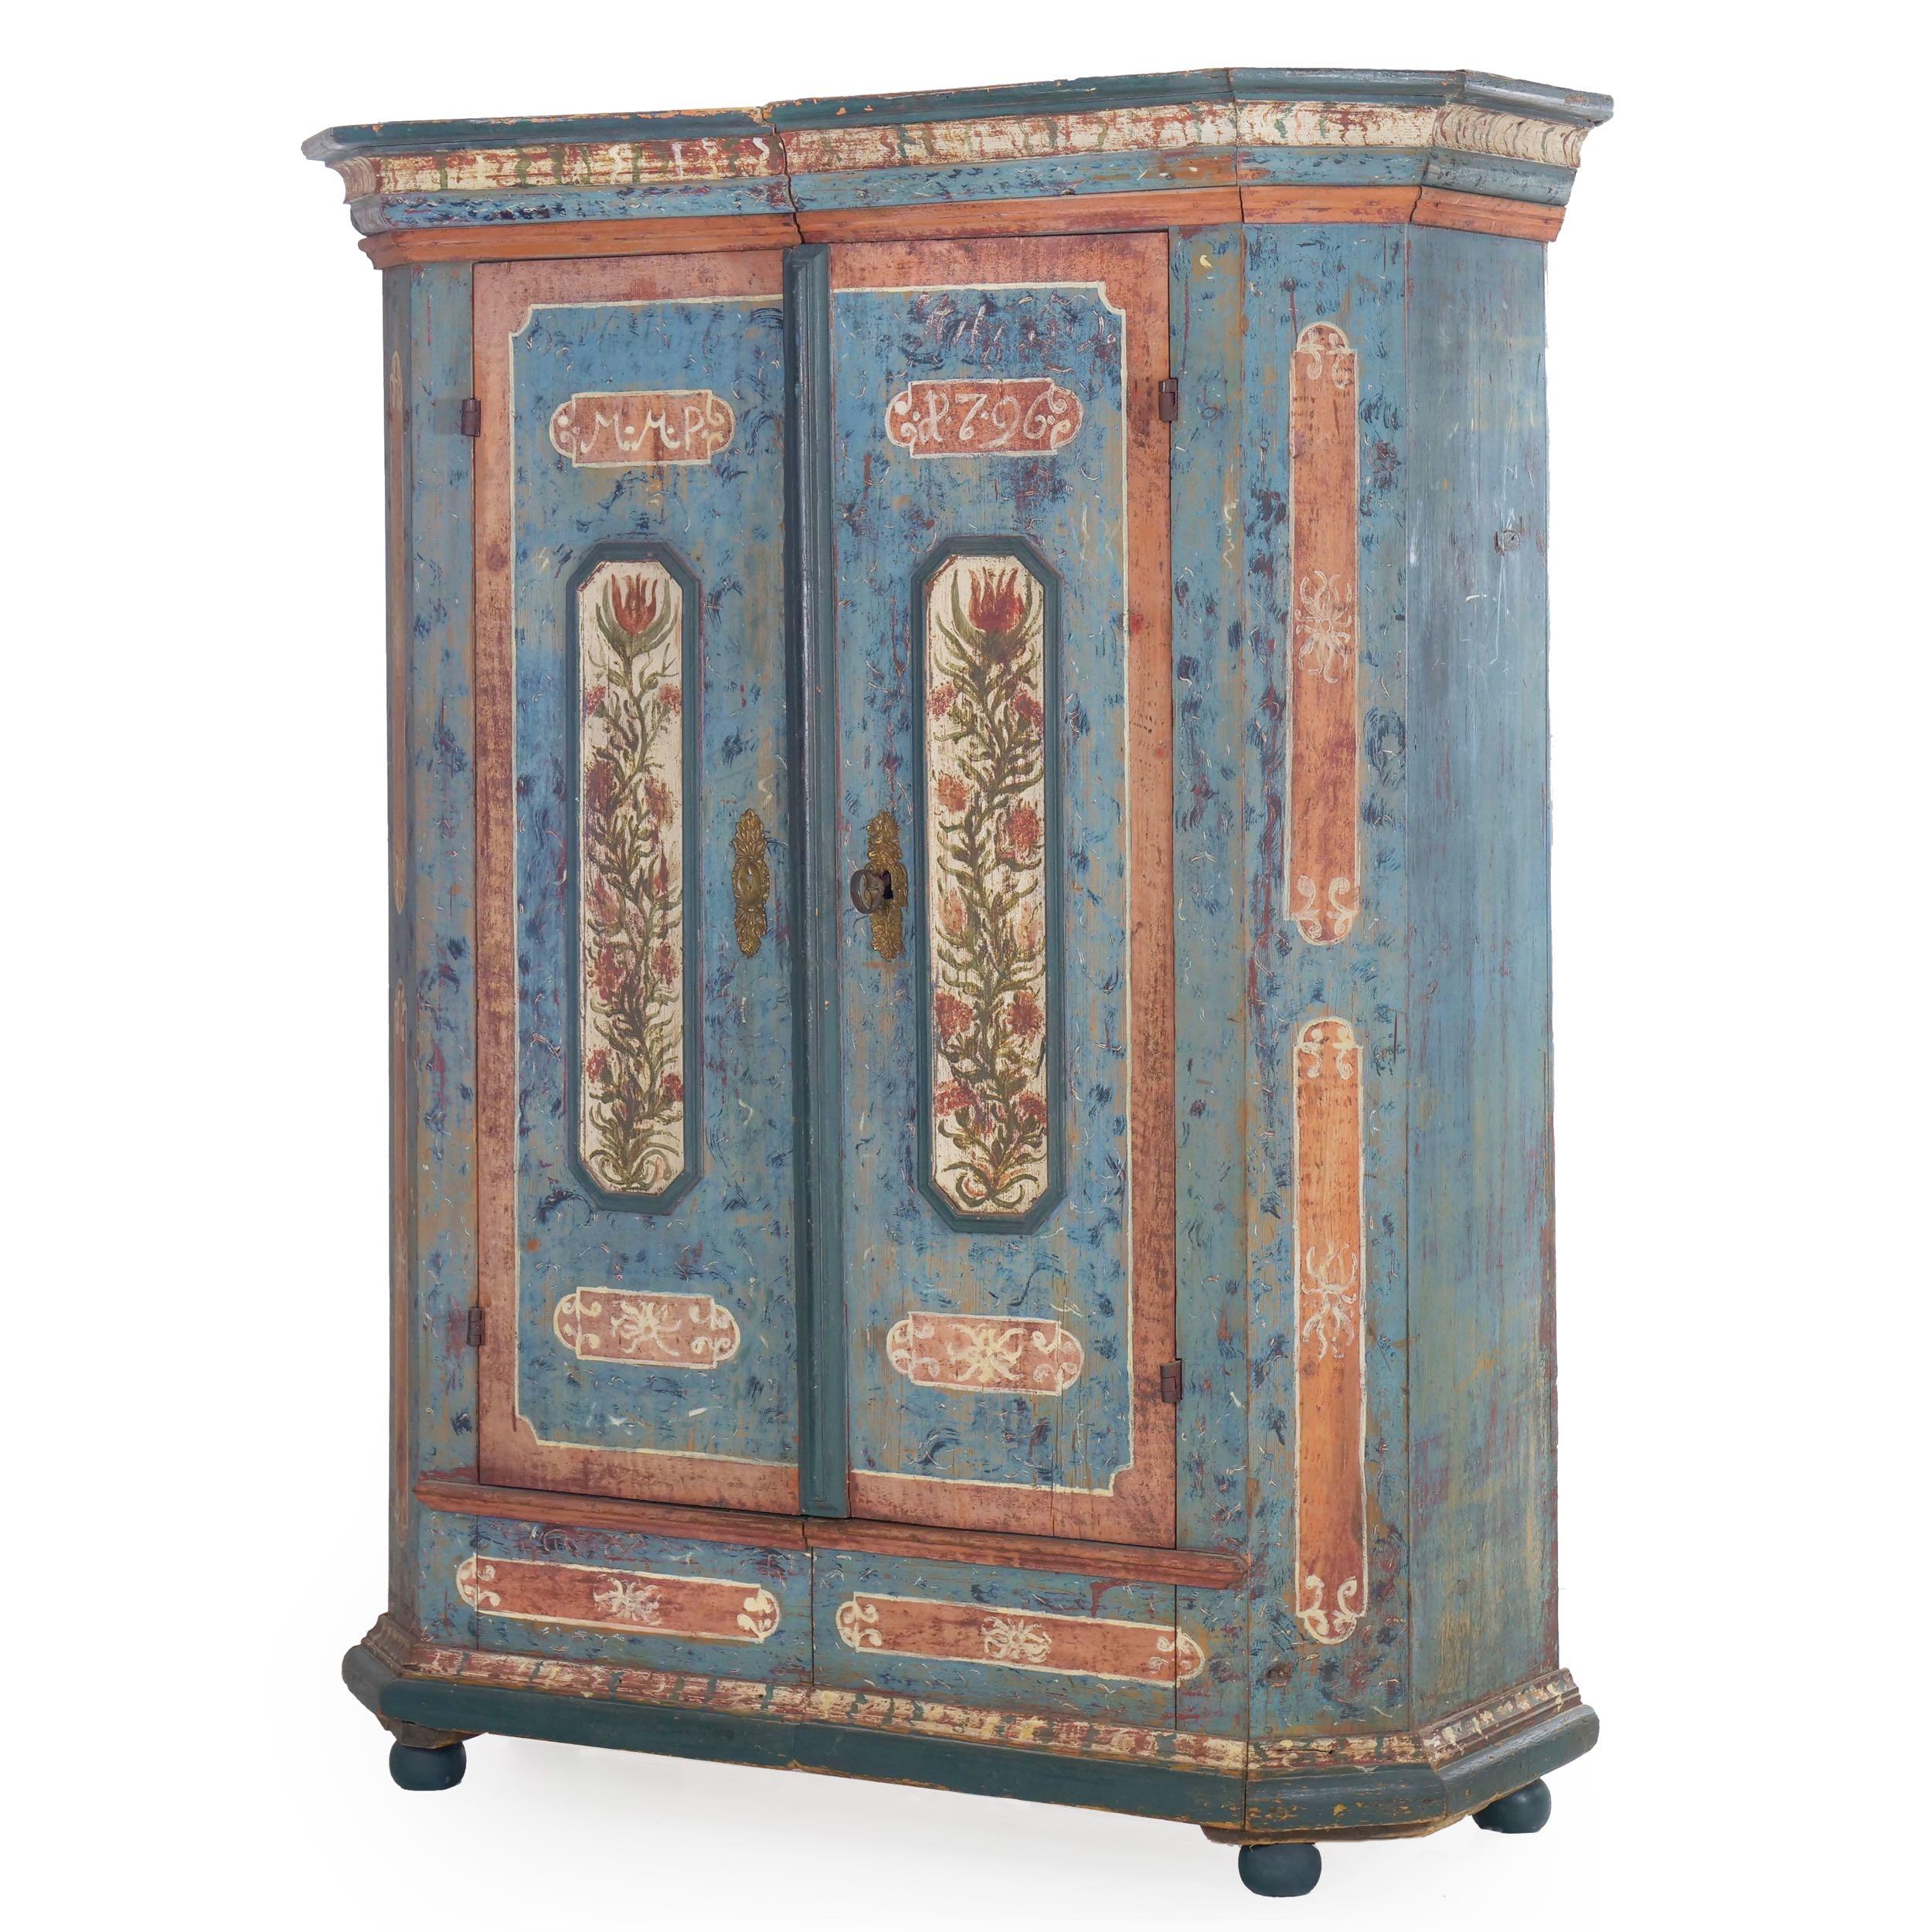 A gorgeous wedding schrank in early dusty robin's egg blue with coral painted highlights surrounding blue molded panels of cream with chaotic floral decorations in the doors, it has been conveniently built as a 